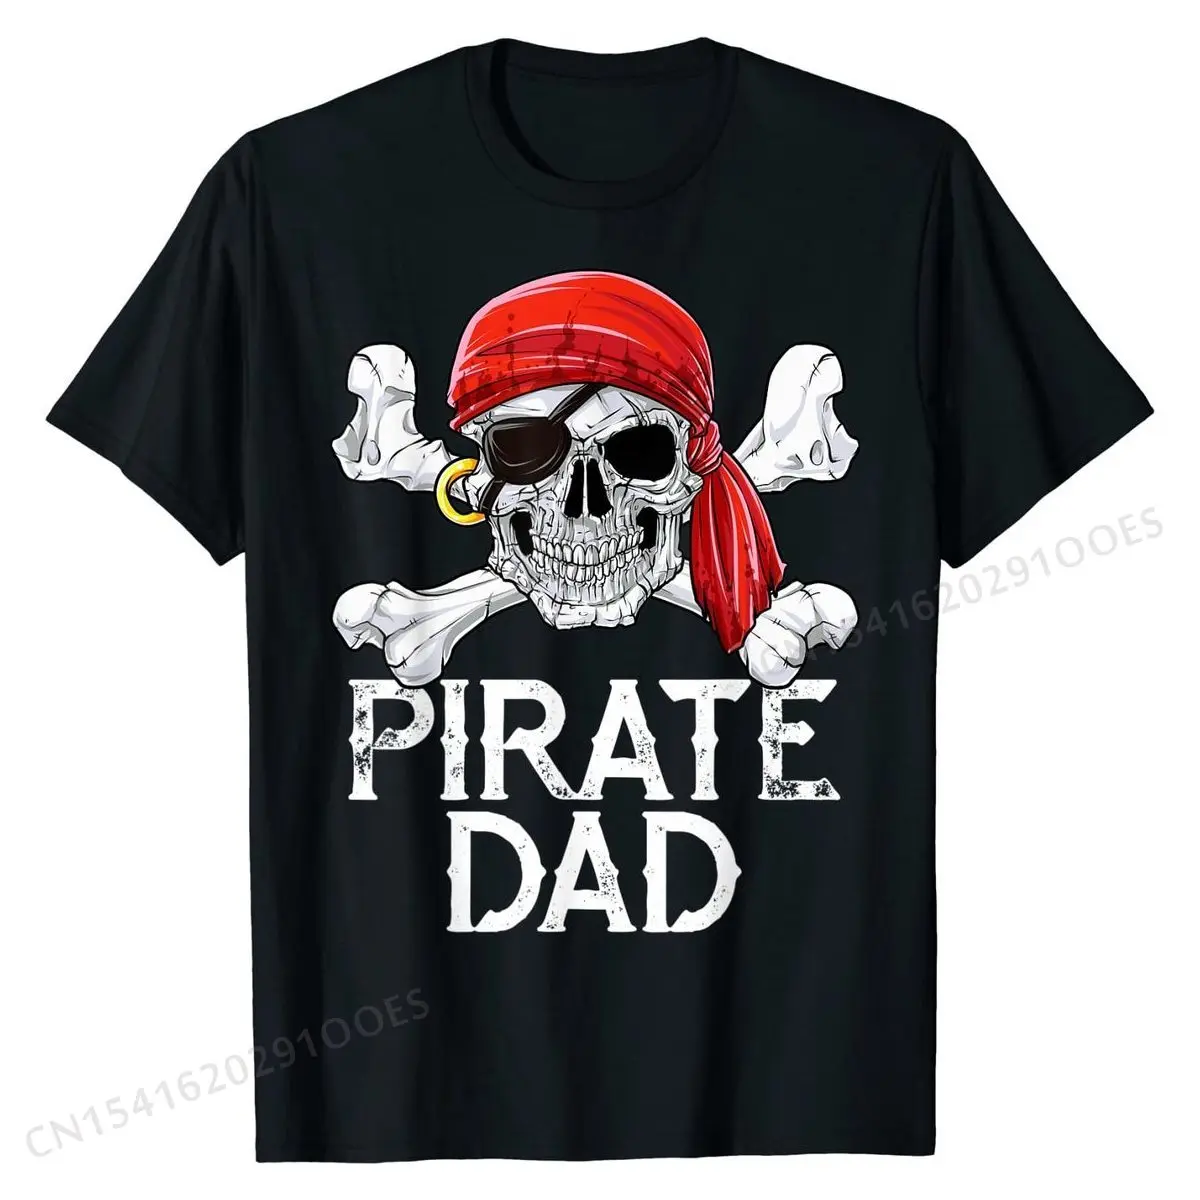 

Pirate Dad T shirt Roger Flag Skull & Crossbones Tees Cotton T Shirts for Men Printed Tees Company Casual